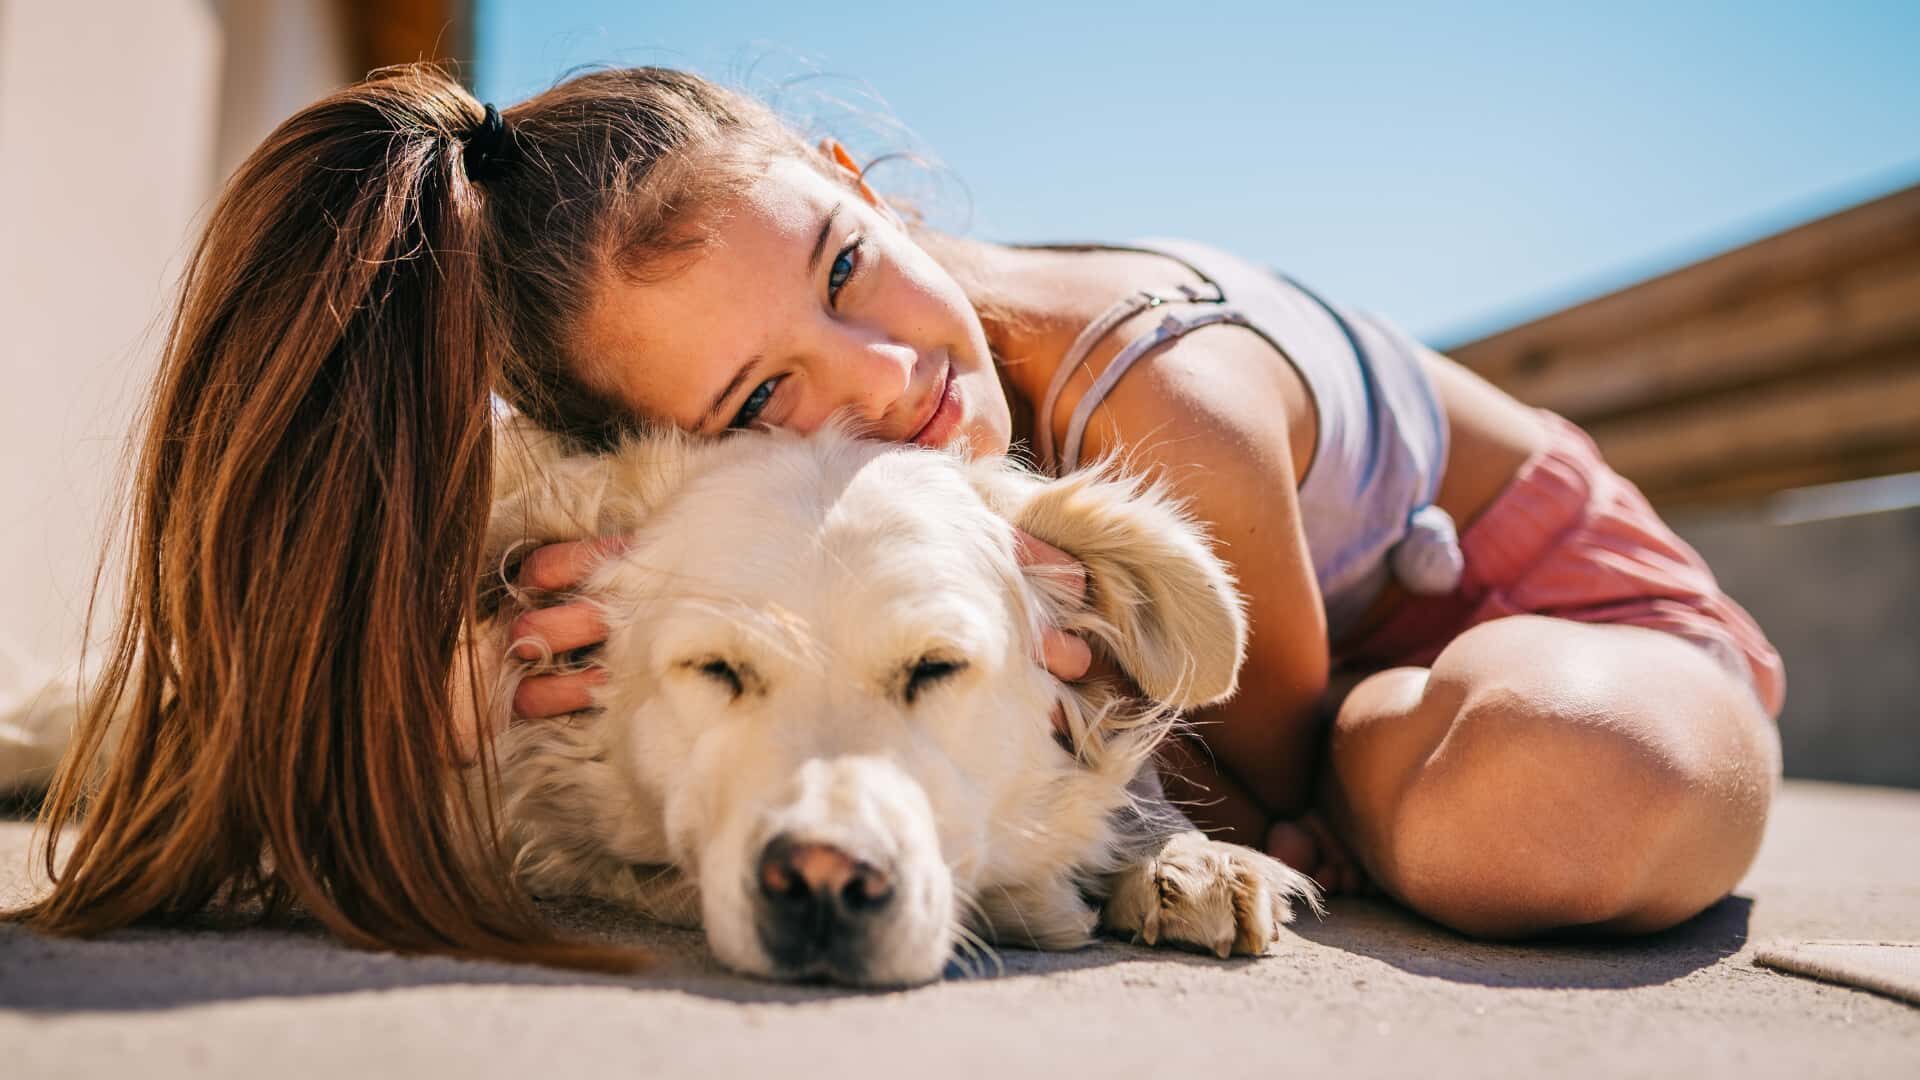 What Is an Emotional Support Dog For: Guide with Best 5 Dogs